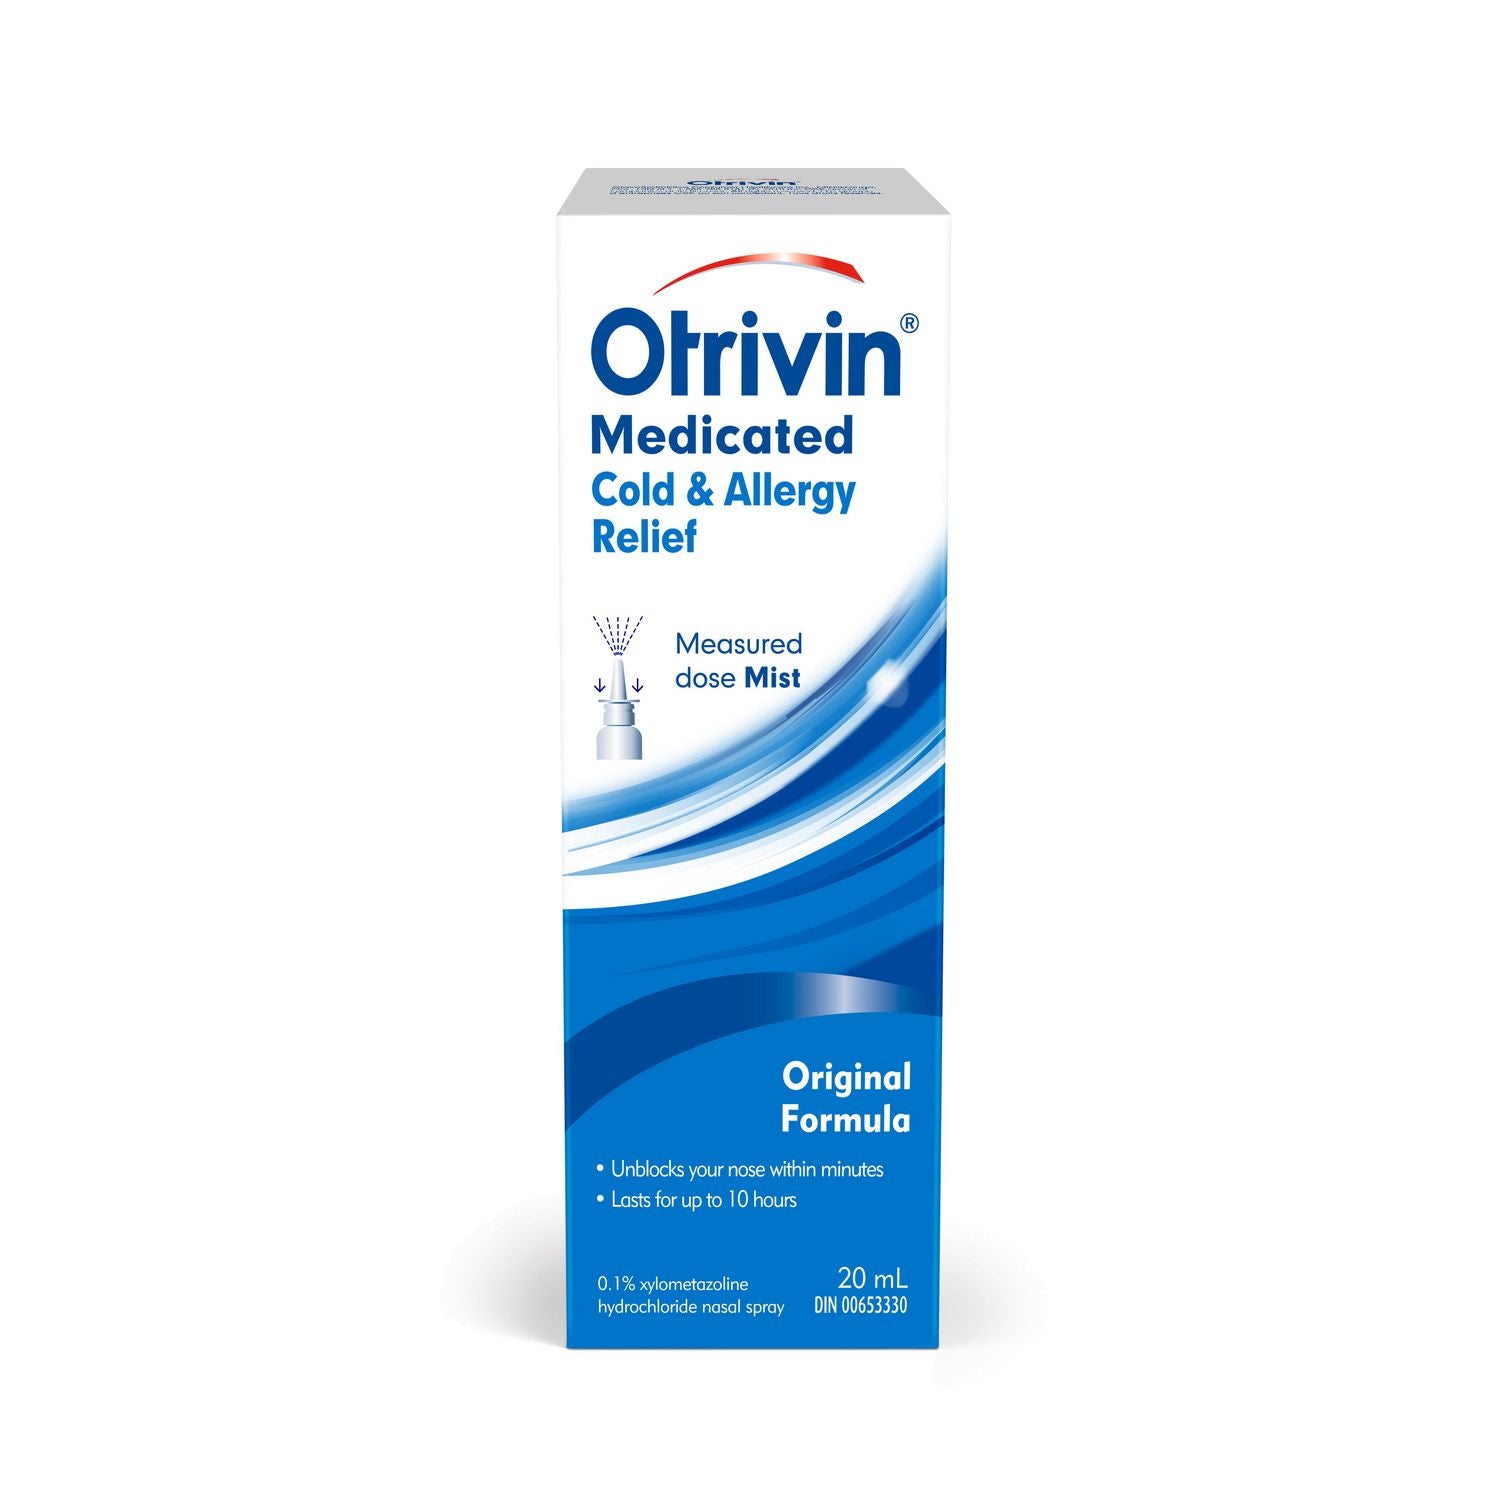 Otrivin Medicated Cold & Allergy Relief, Measured Dose Mist - 20 ml